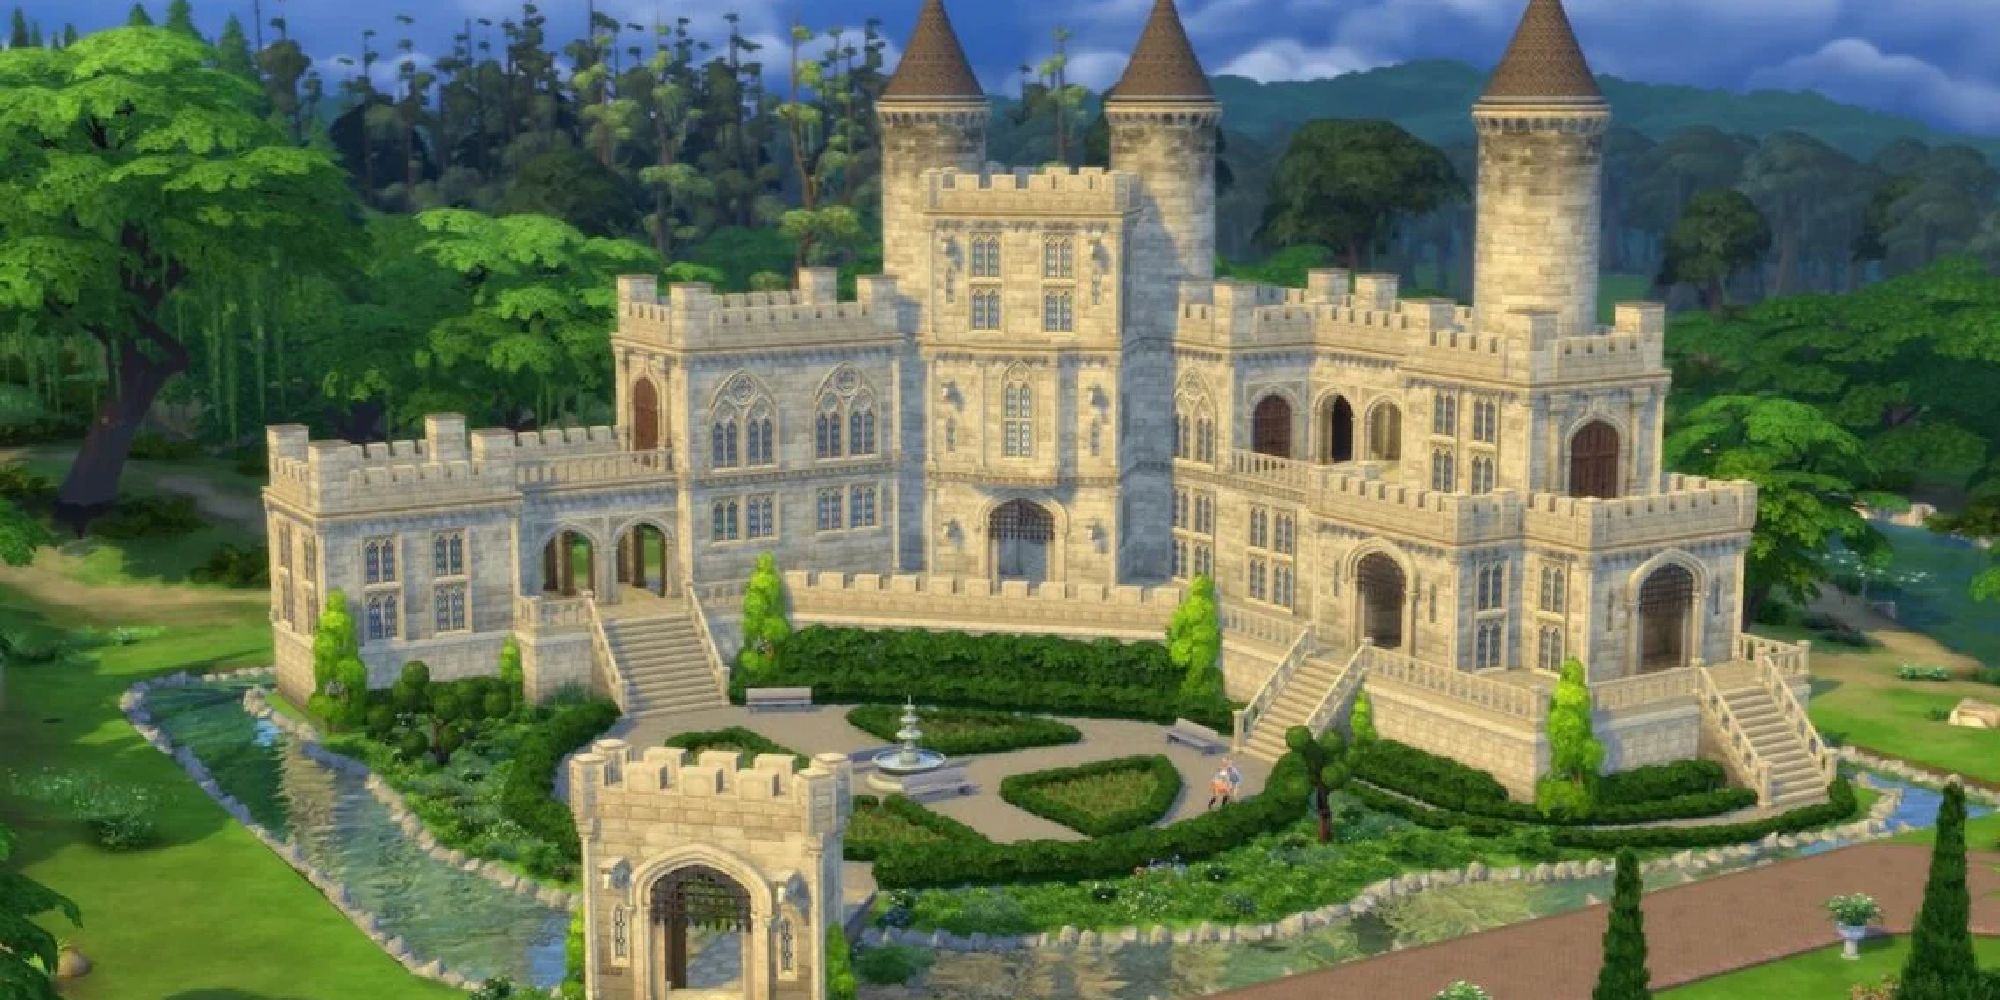 The Sims 4 castle with a giant moat and portcullis gate